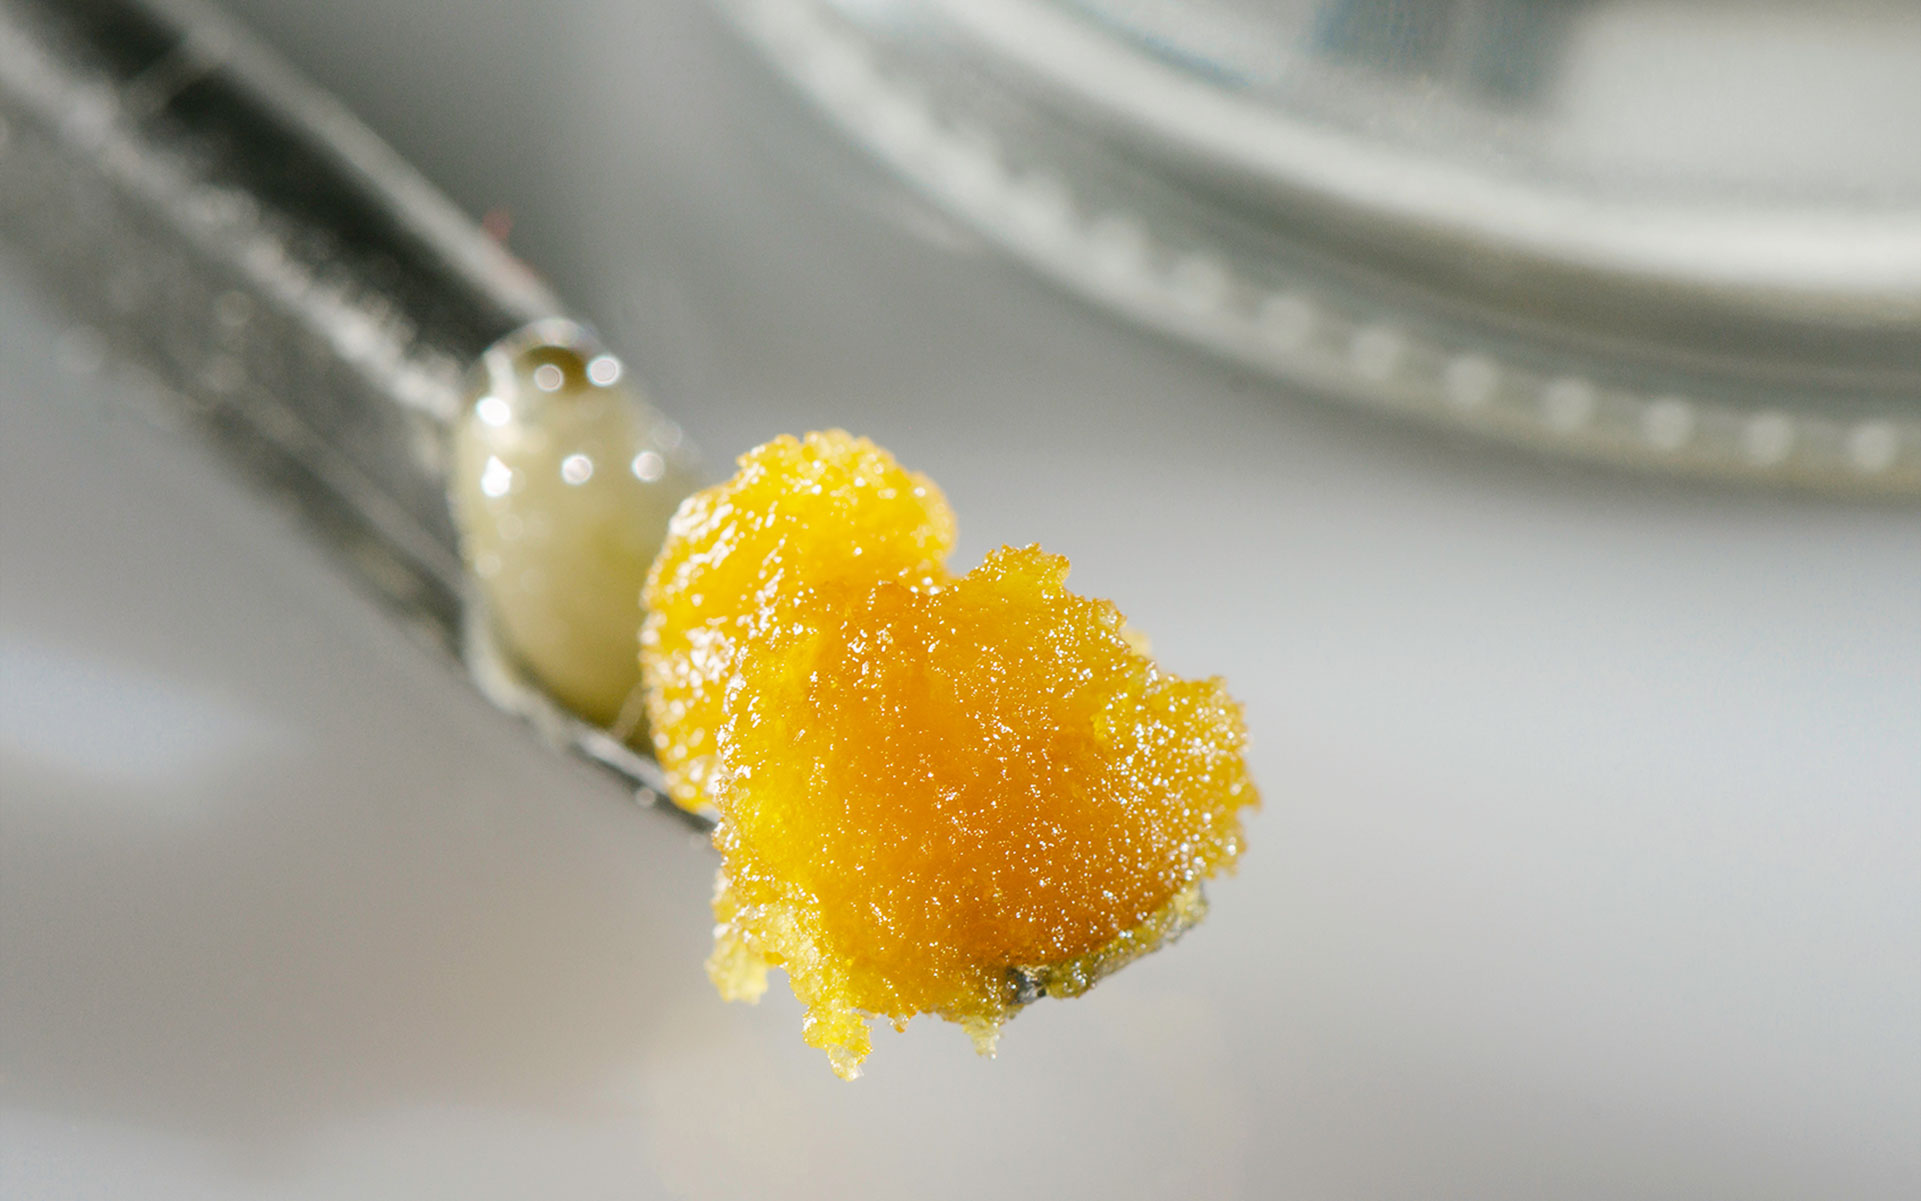 extraction, cannabis concentrate, marijuana concentrate